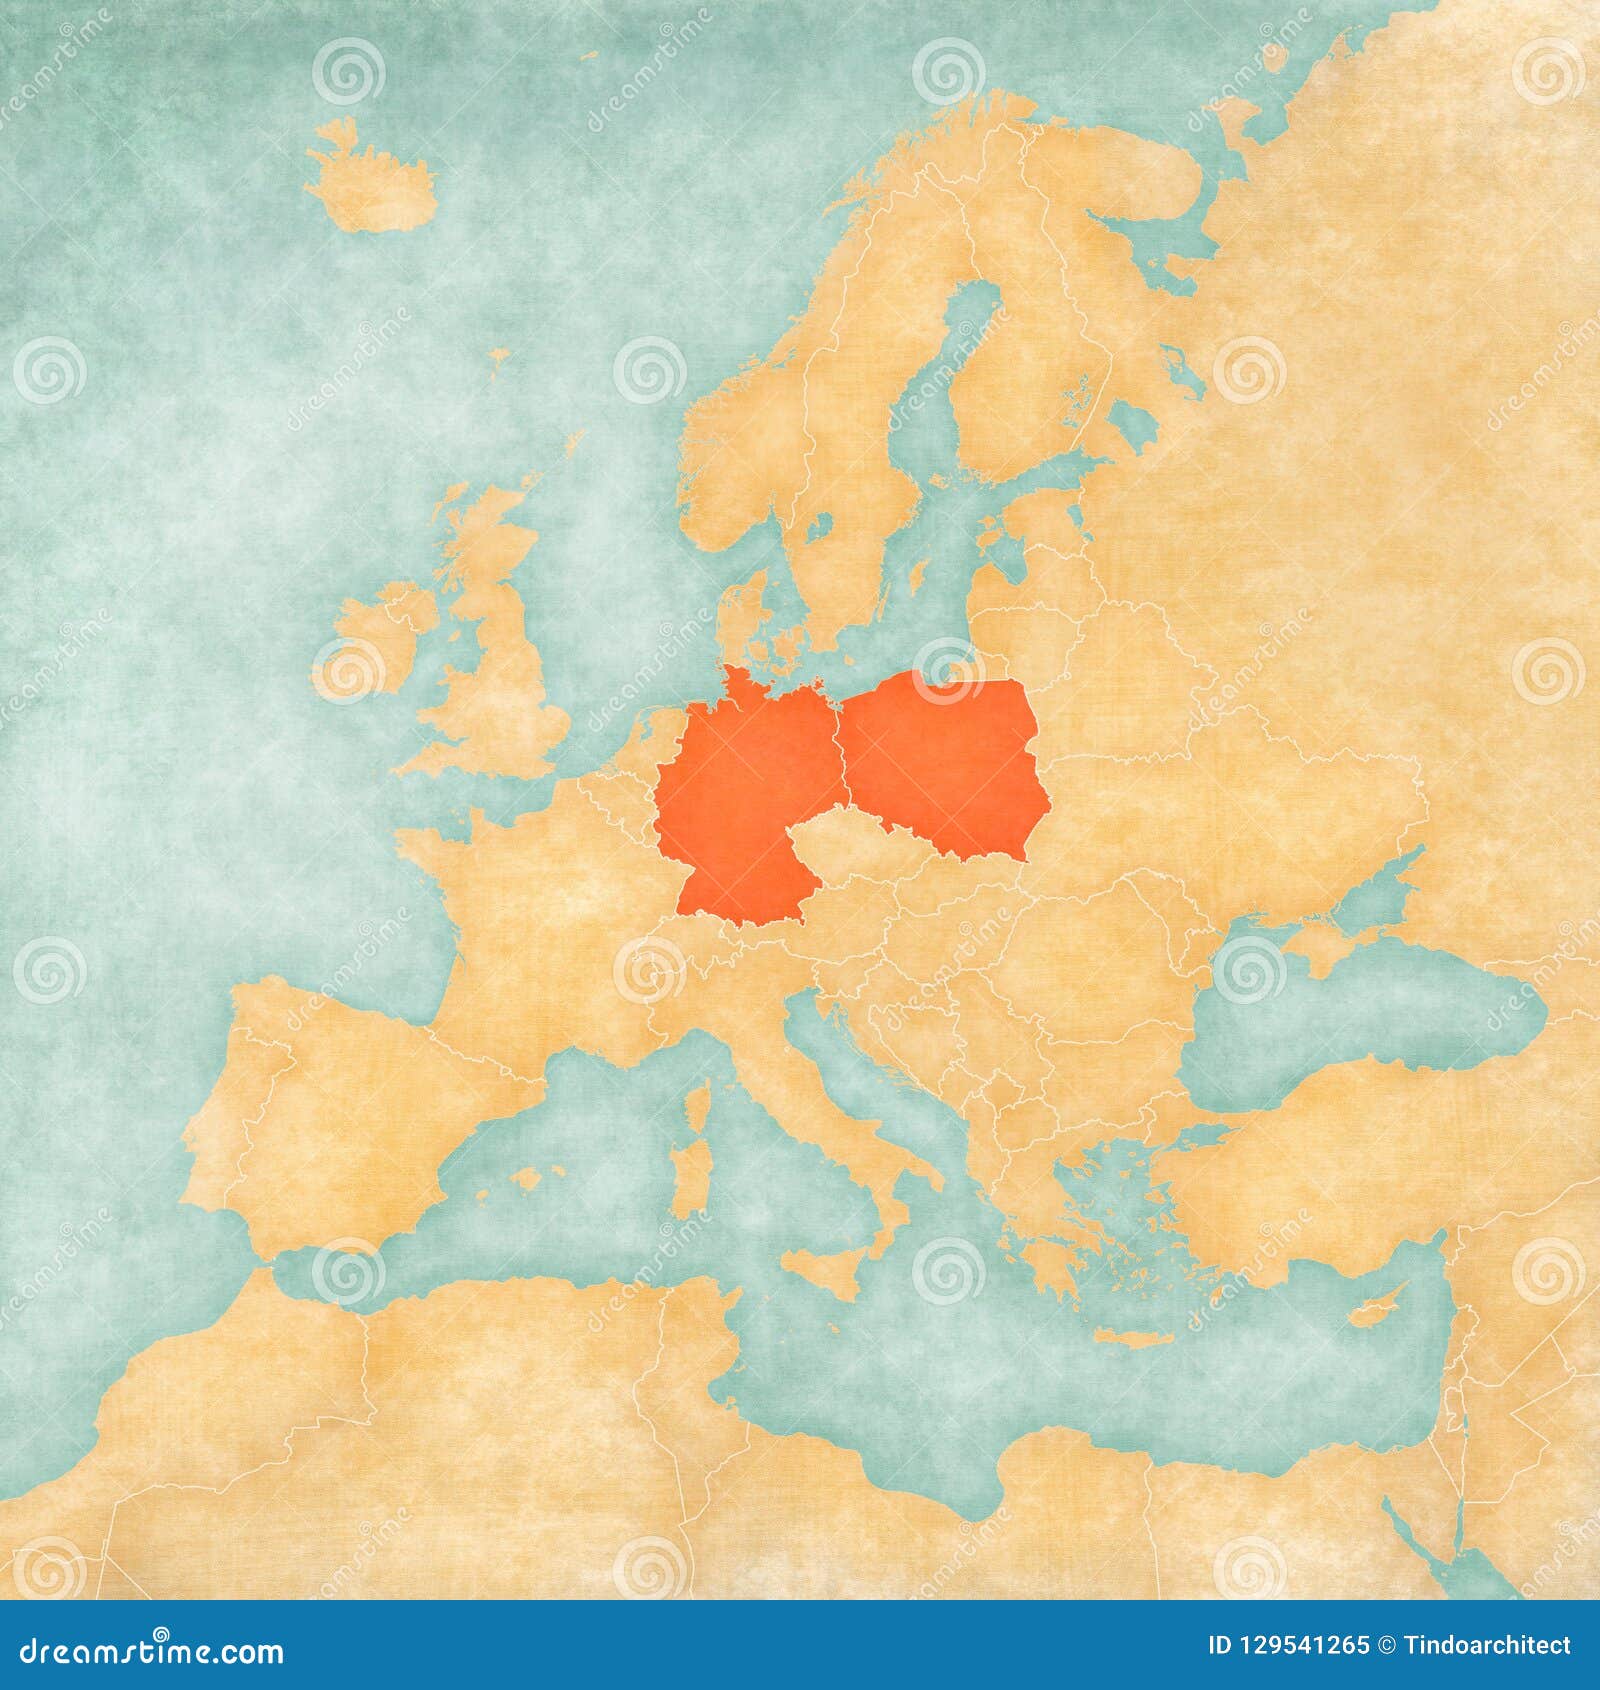 map of europe germany and poland Map Of Europe Germany And Poland Stock Illustration map of europe germany and poland